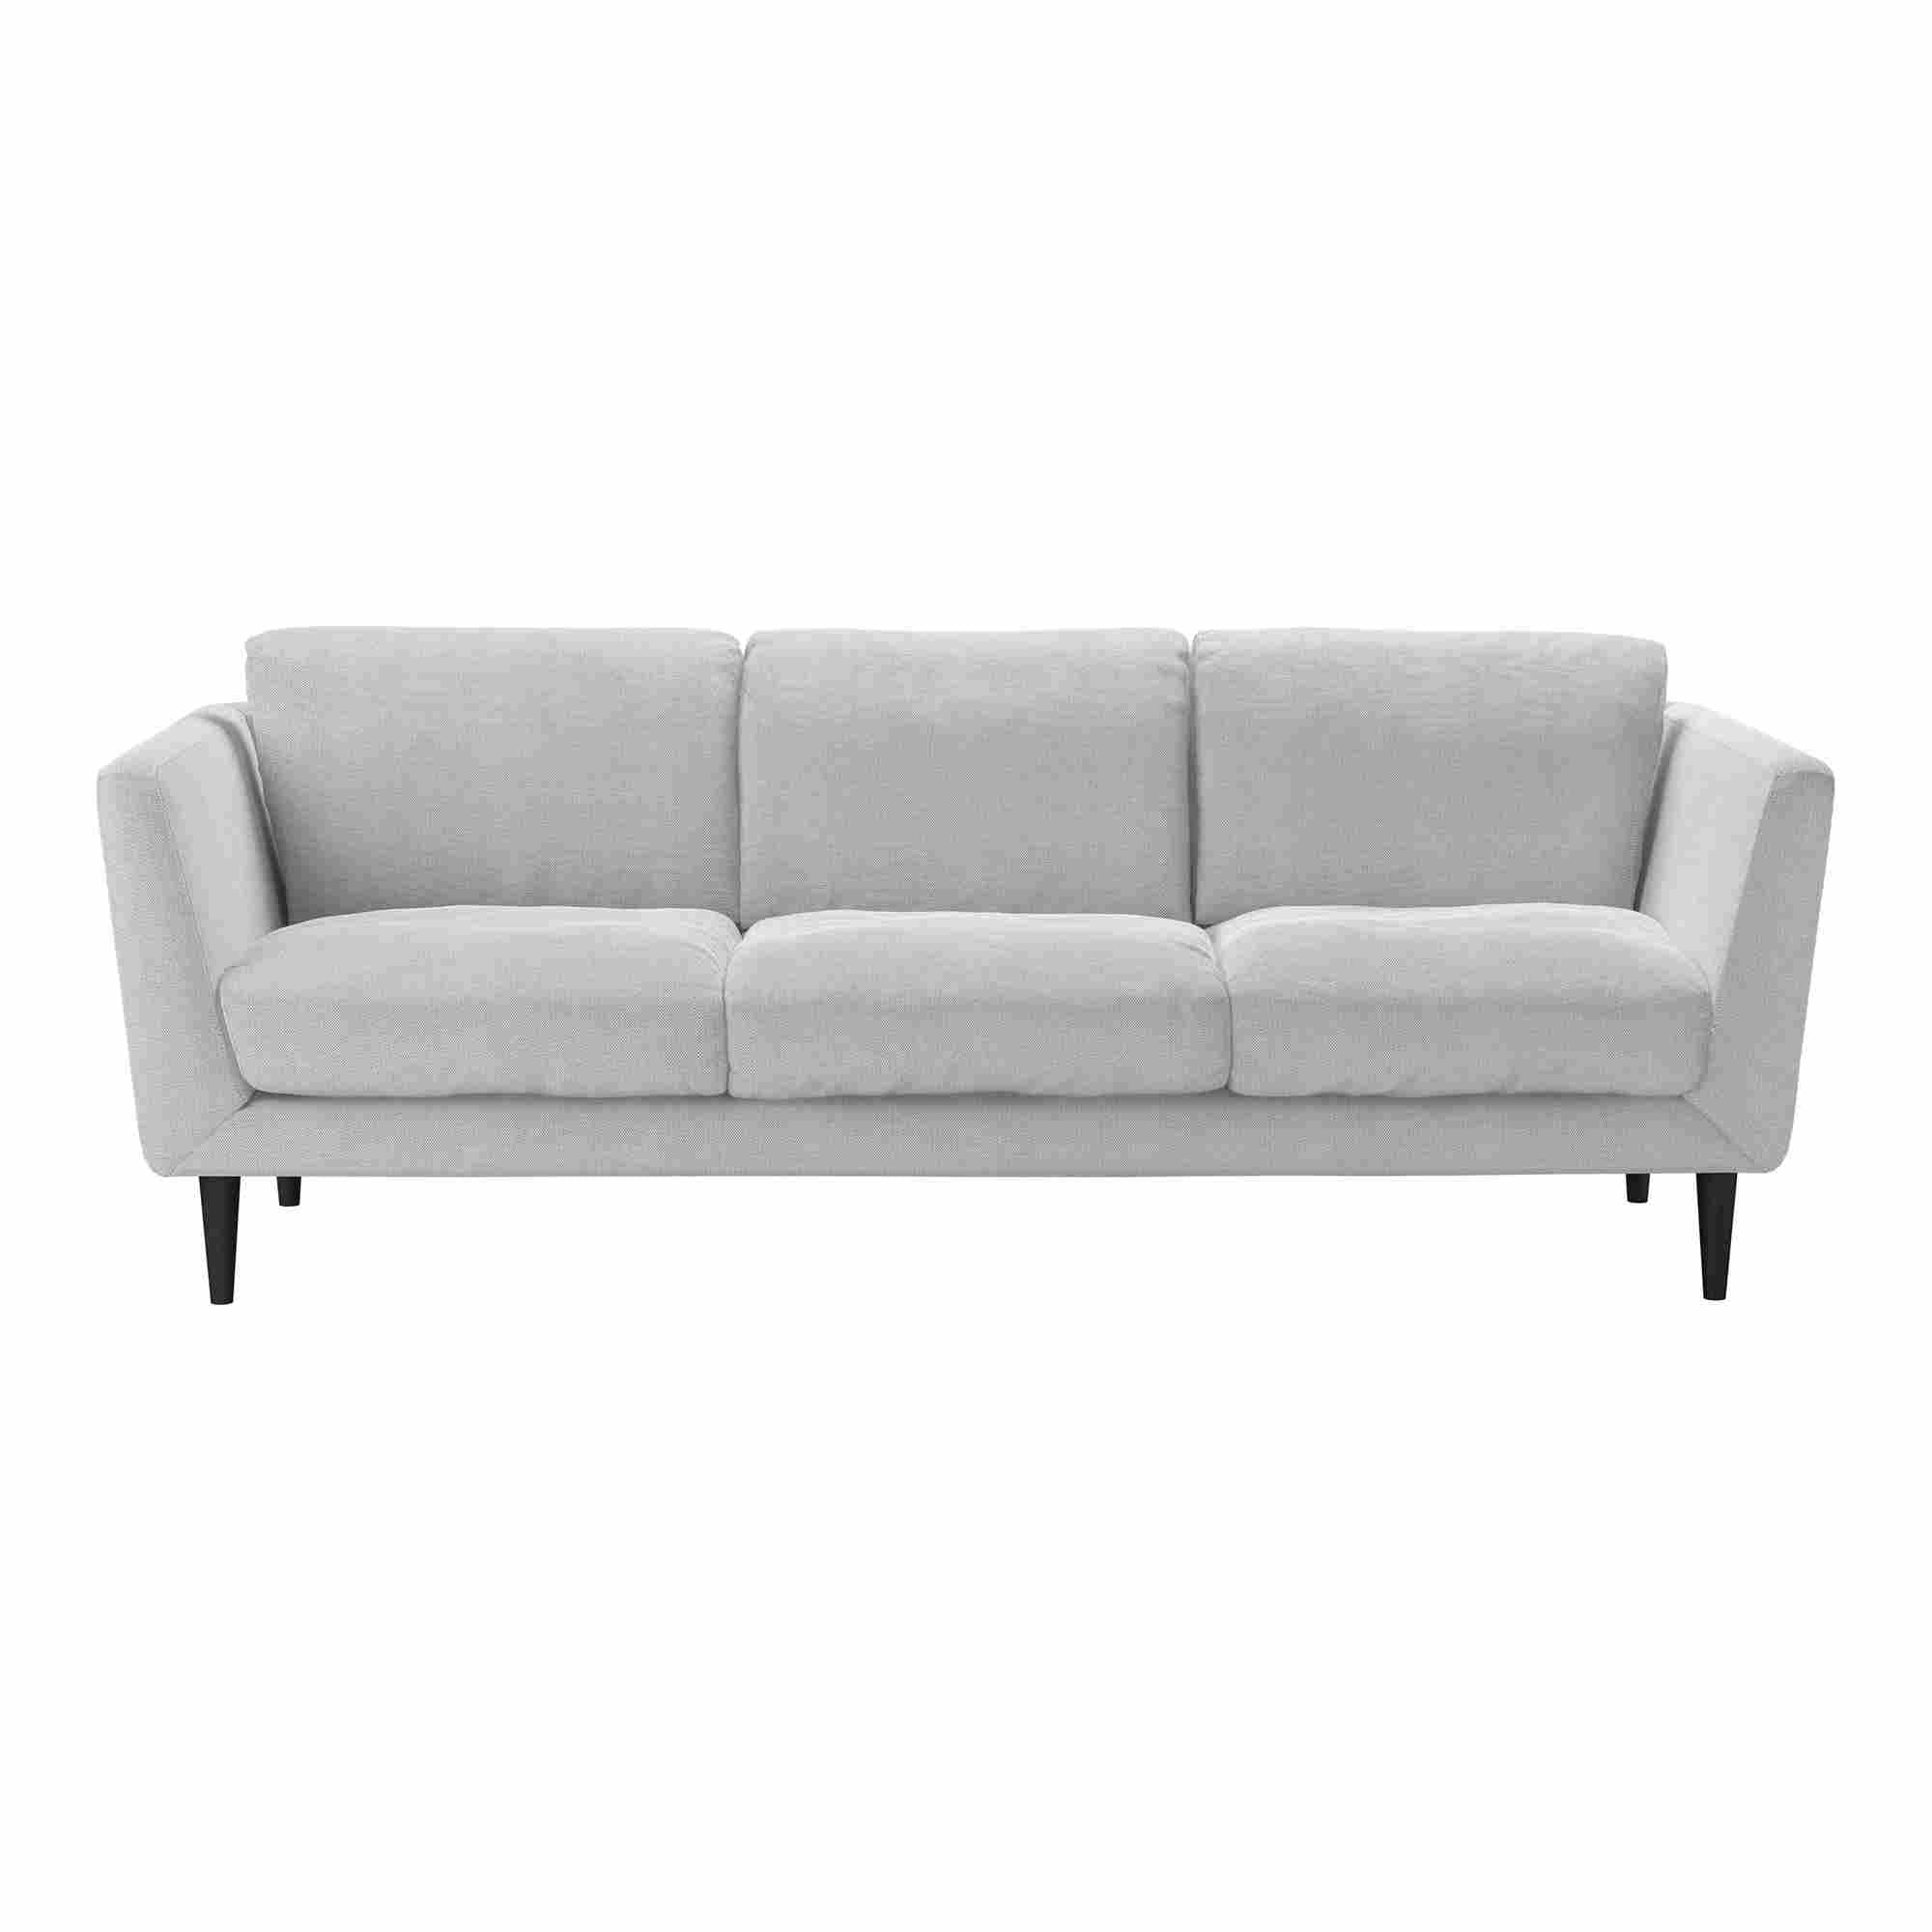 Holly Pumice House Basket Weave Sofa - 3 Seater